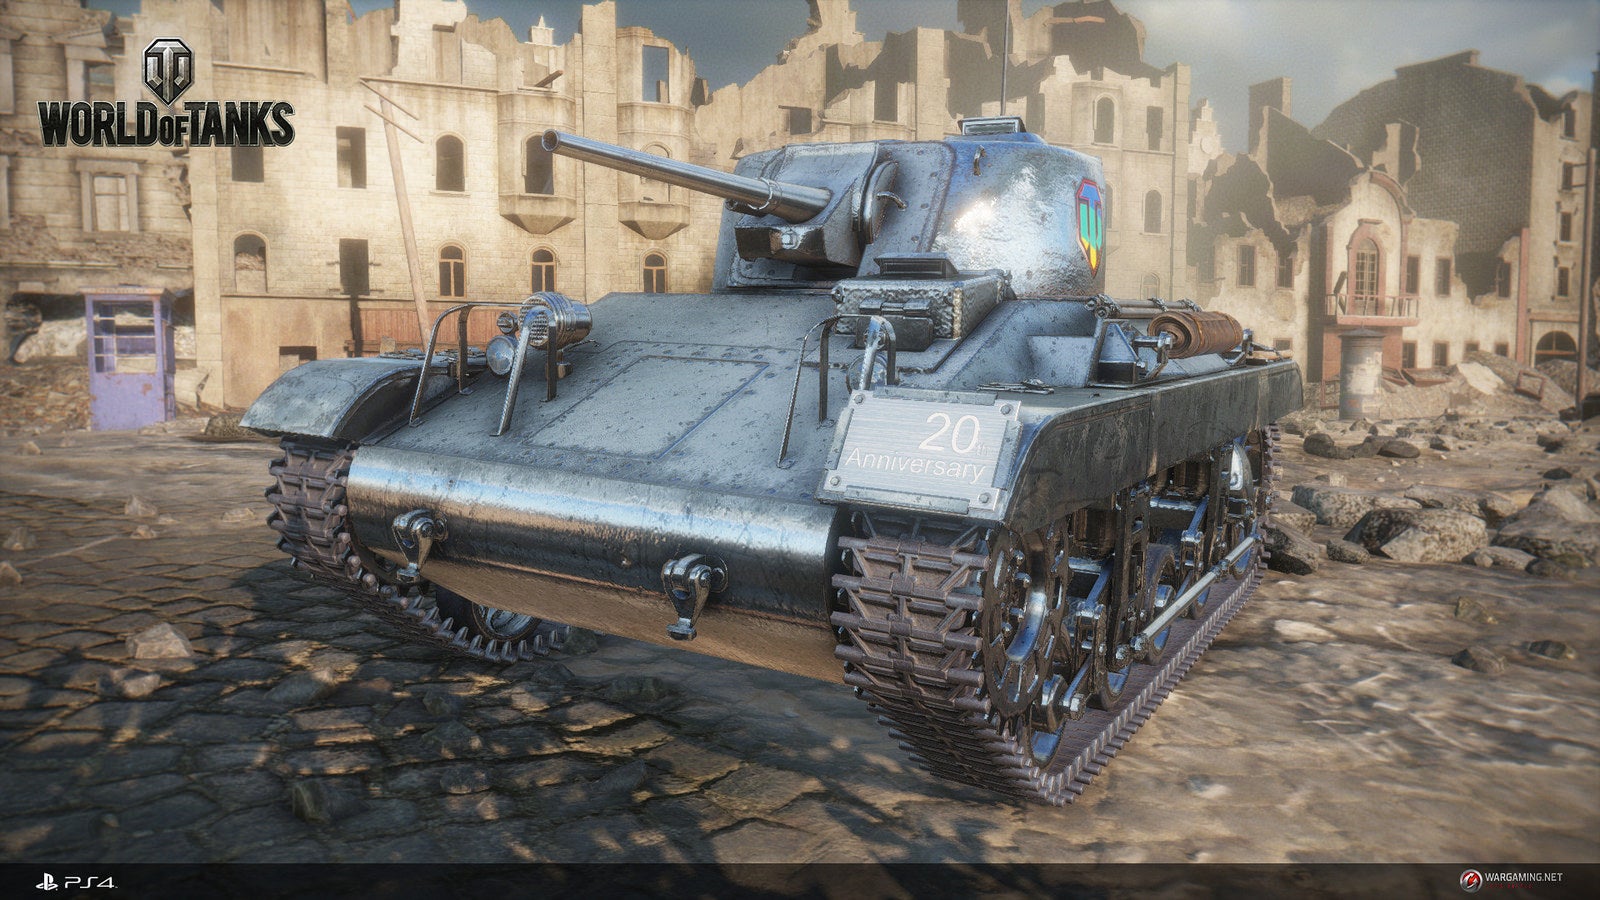 Fordi Rød dato alias World of Tanks PS4 open beta takes place the first weekend of December |  VG247